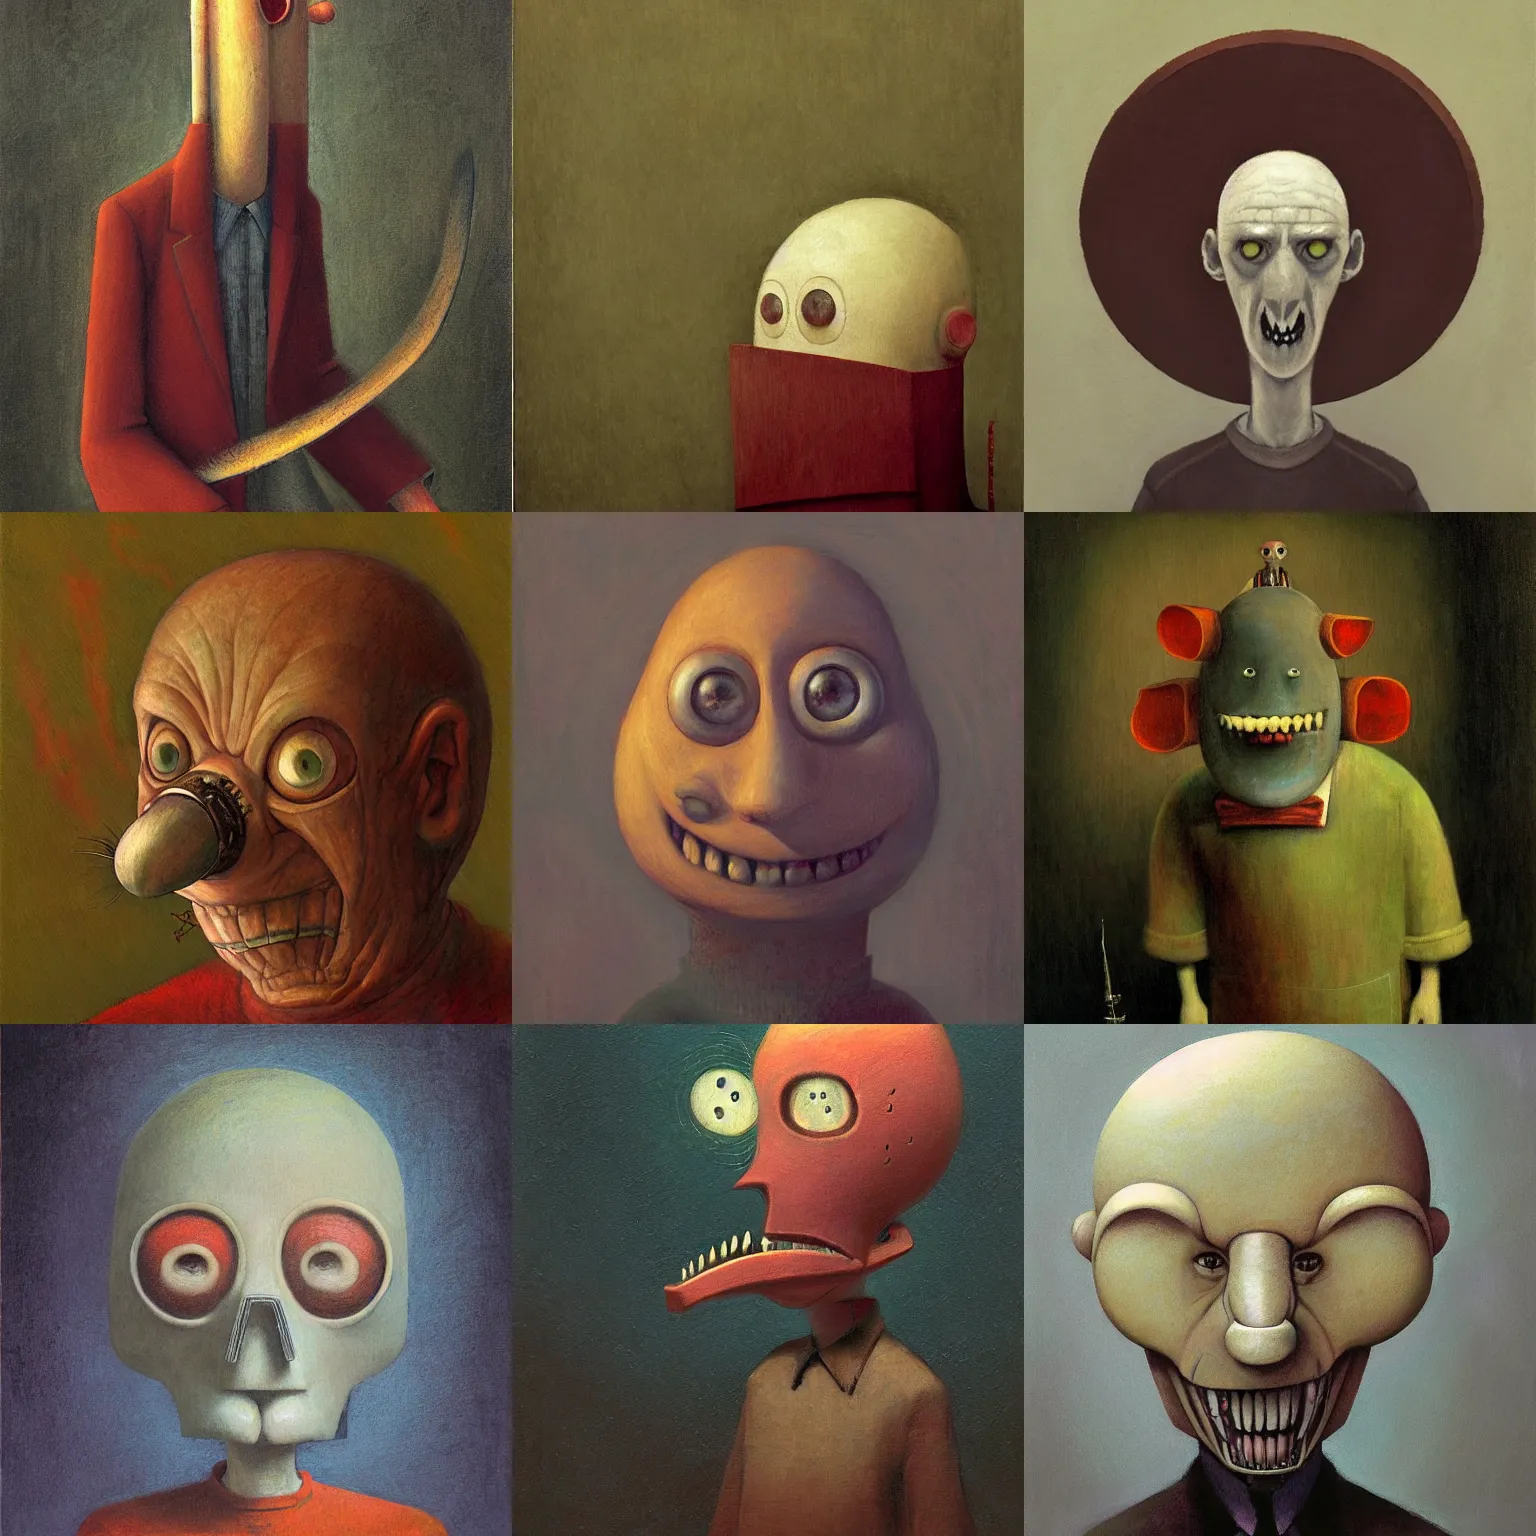 Prompt: a portrait of a mad character by shaun tan